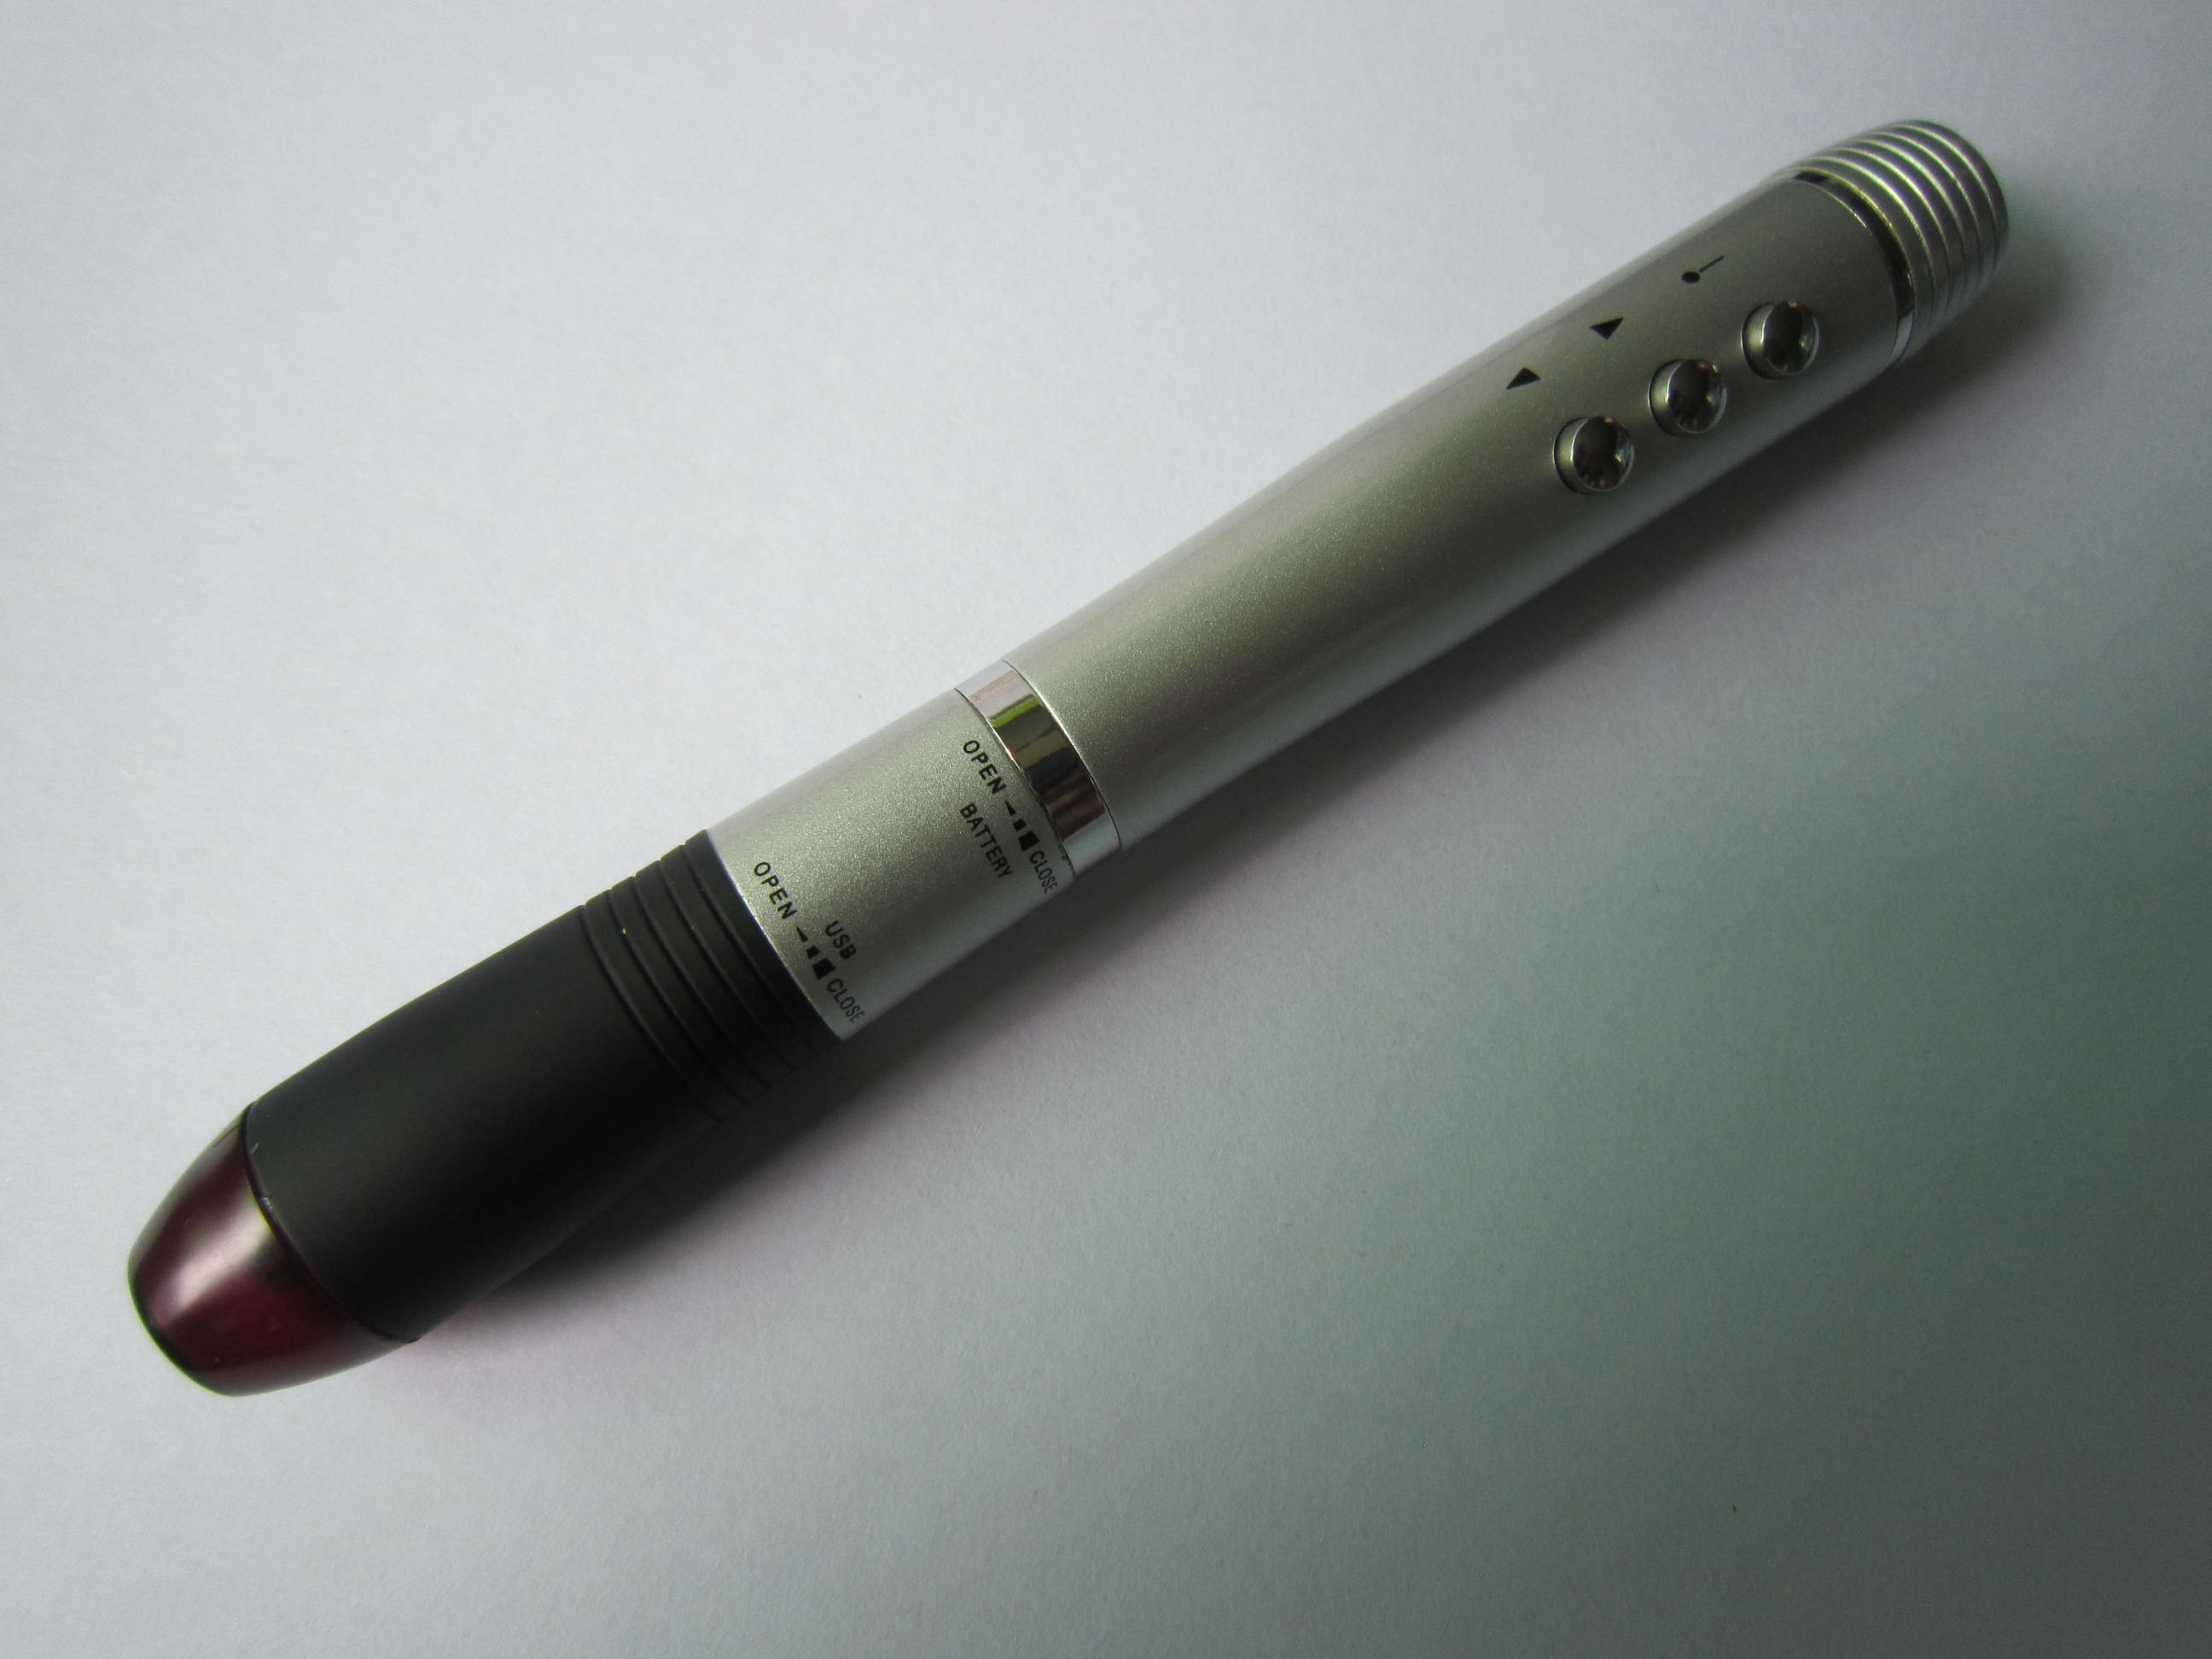 HDW-RS003 Wireless presenter with laser pointer